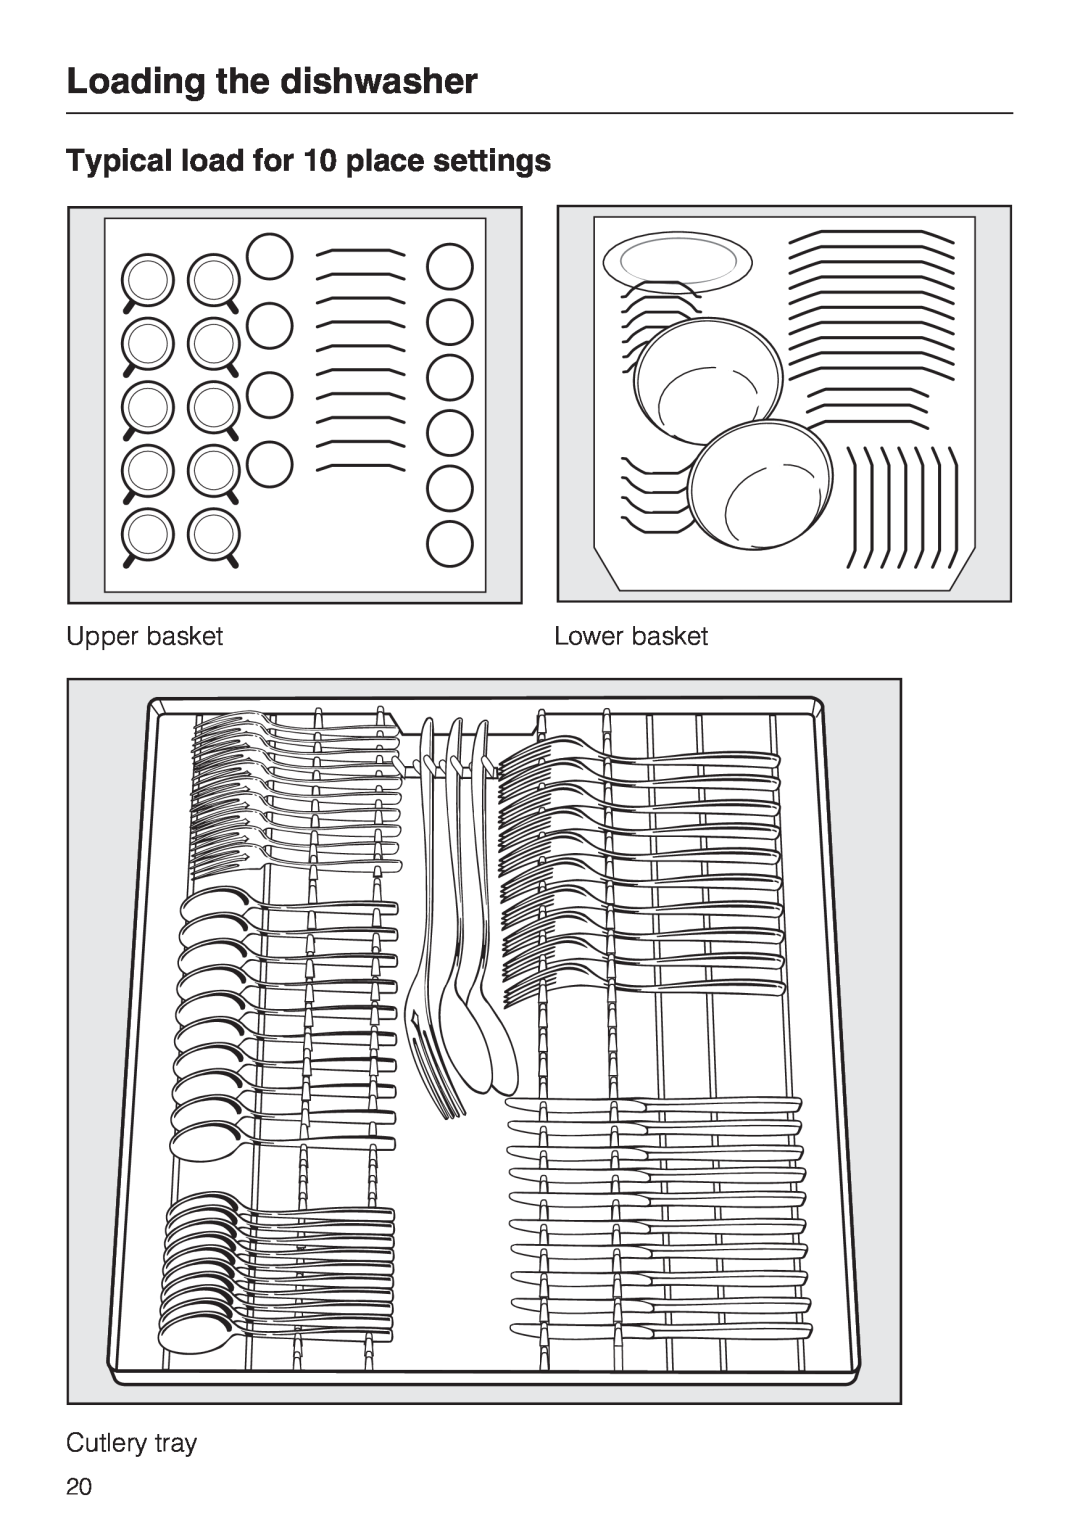 Miele G 5705, G 5700 Typical load for 10 place settings, Loading the dishwasher, Upper basket, Lower basket, Cutlery tray 